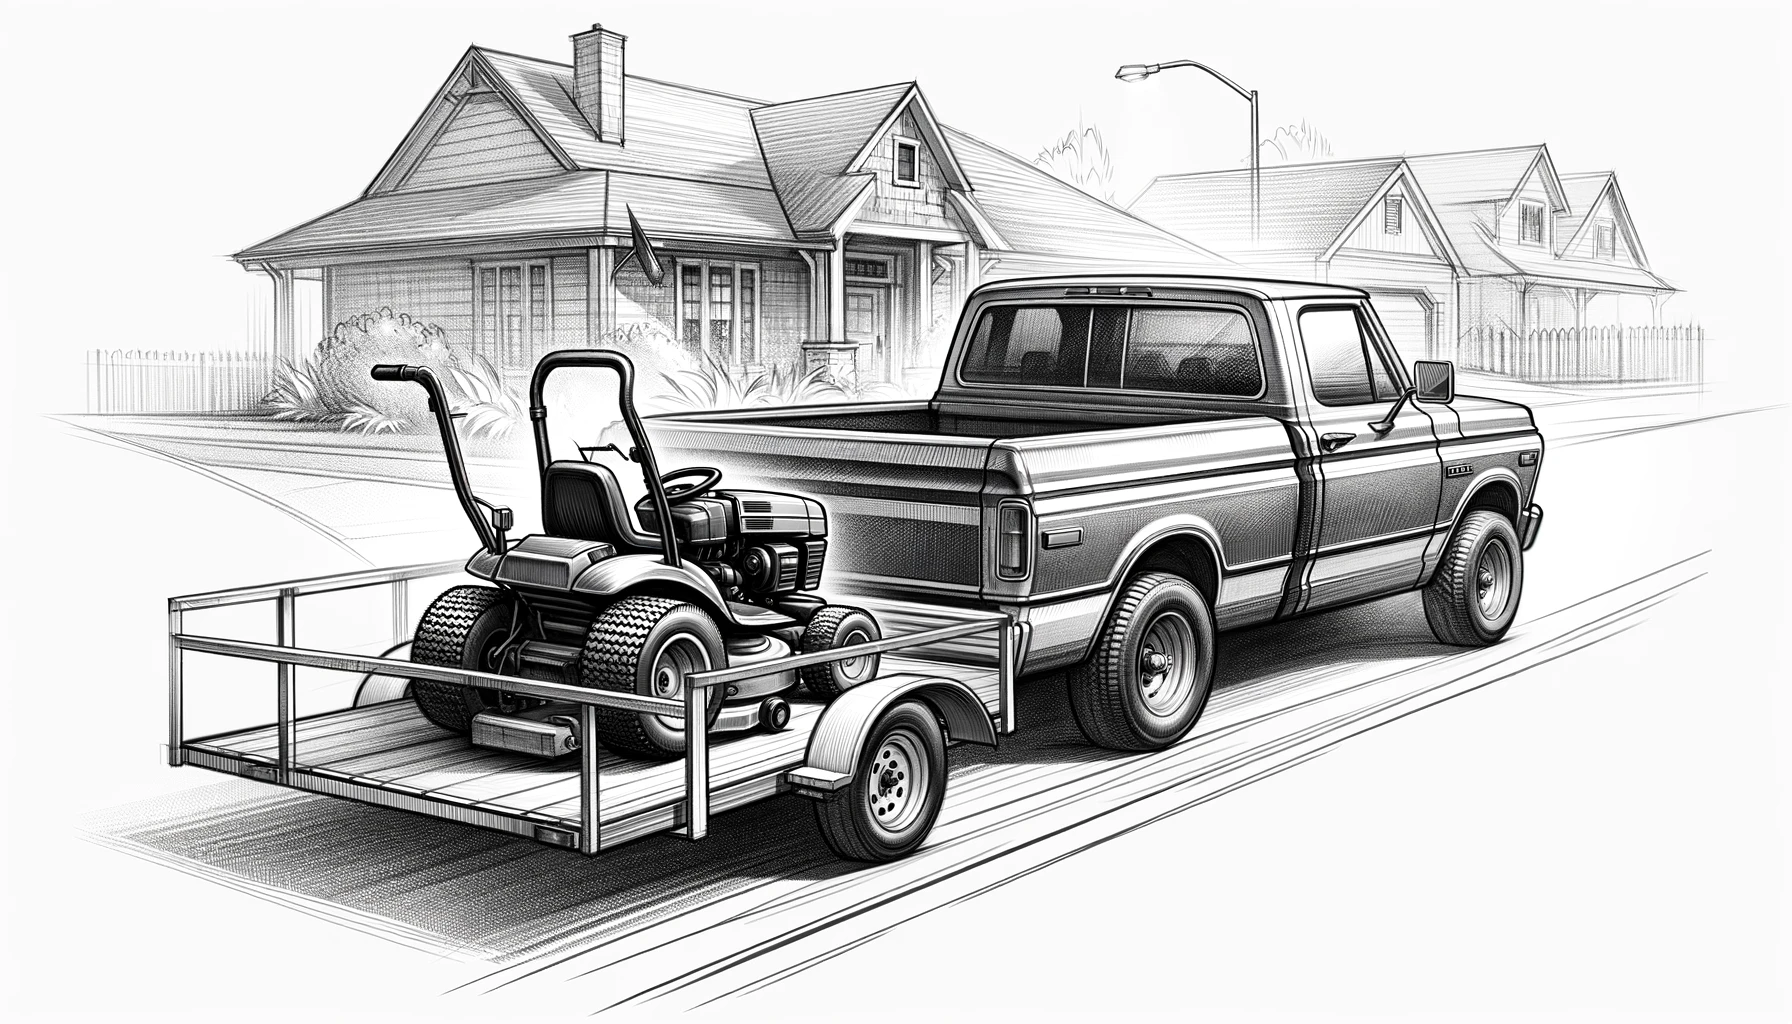 A small truck and mower for landscaping